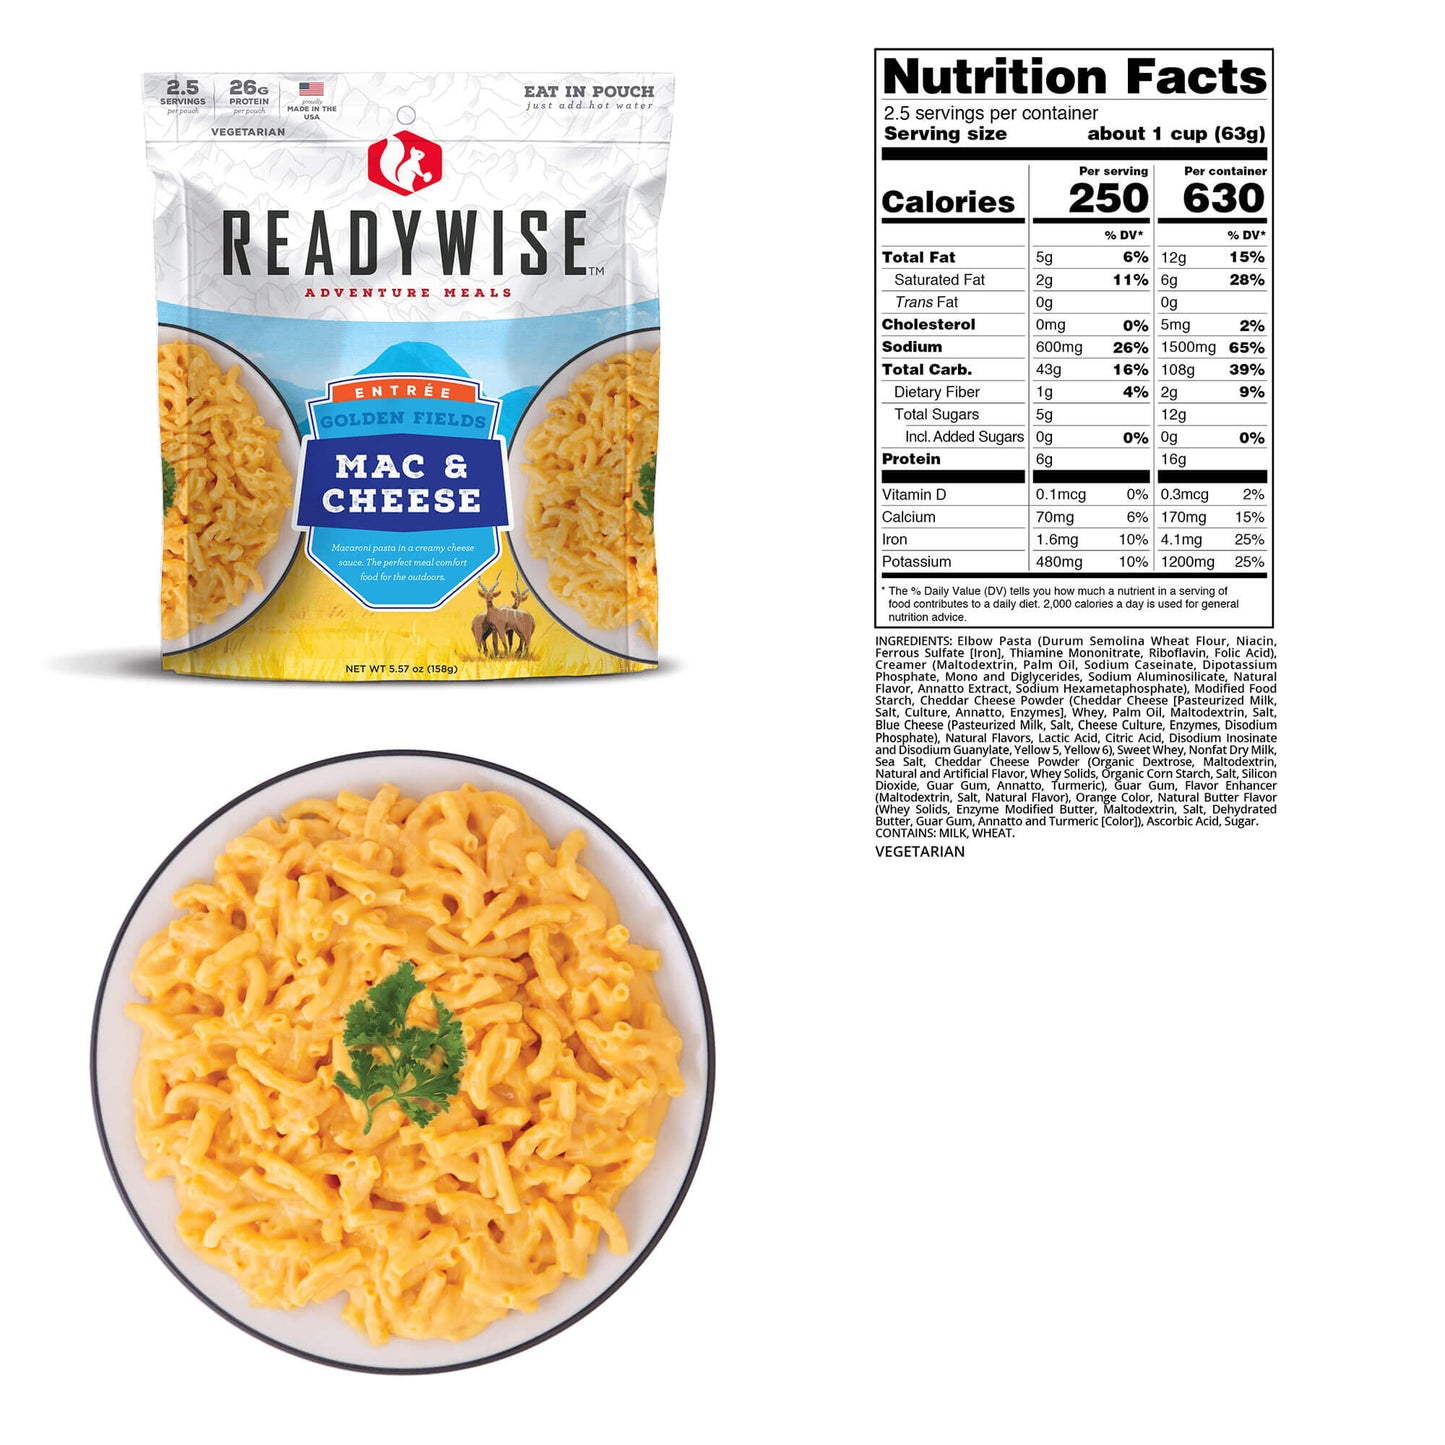 ReadyWise | Hunting Food Calorie Booster Bucket